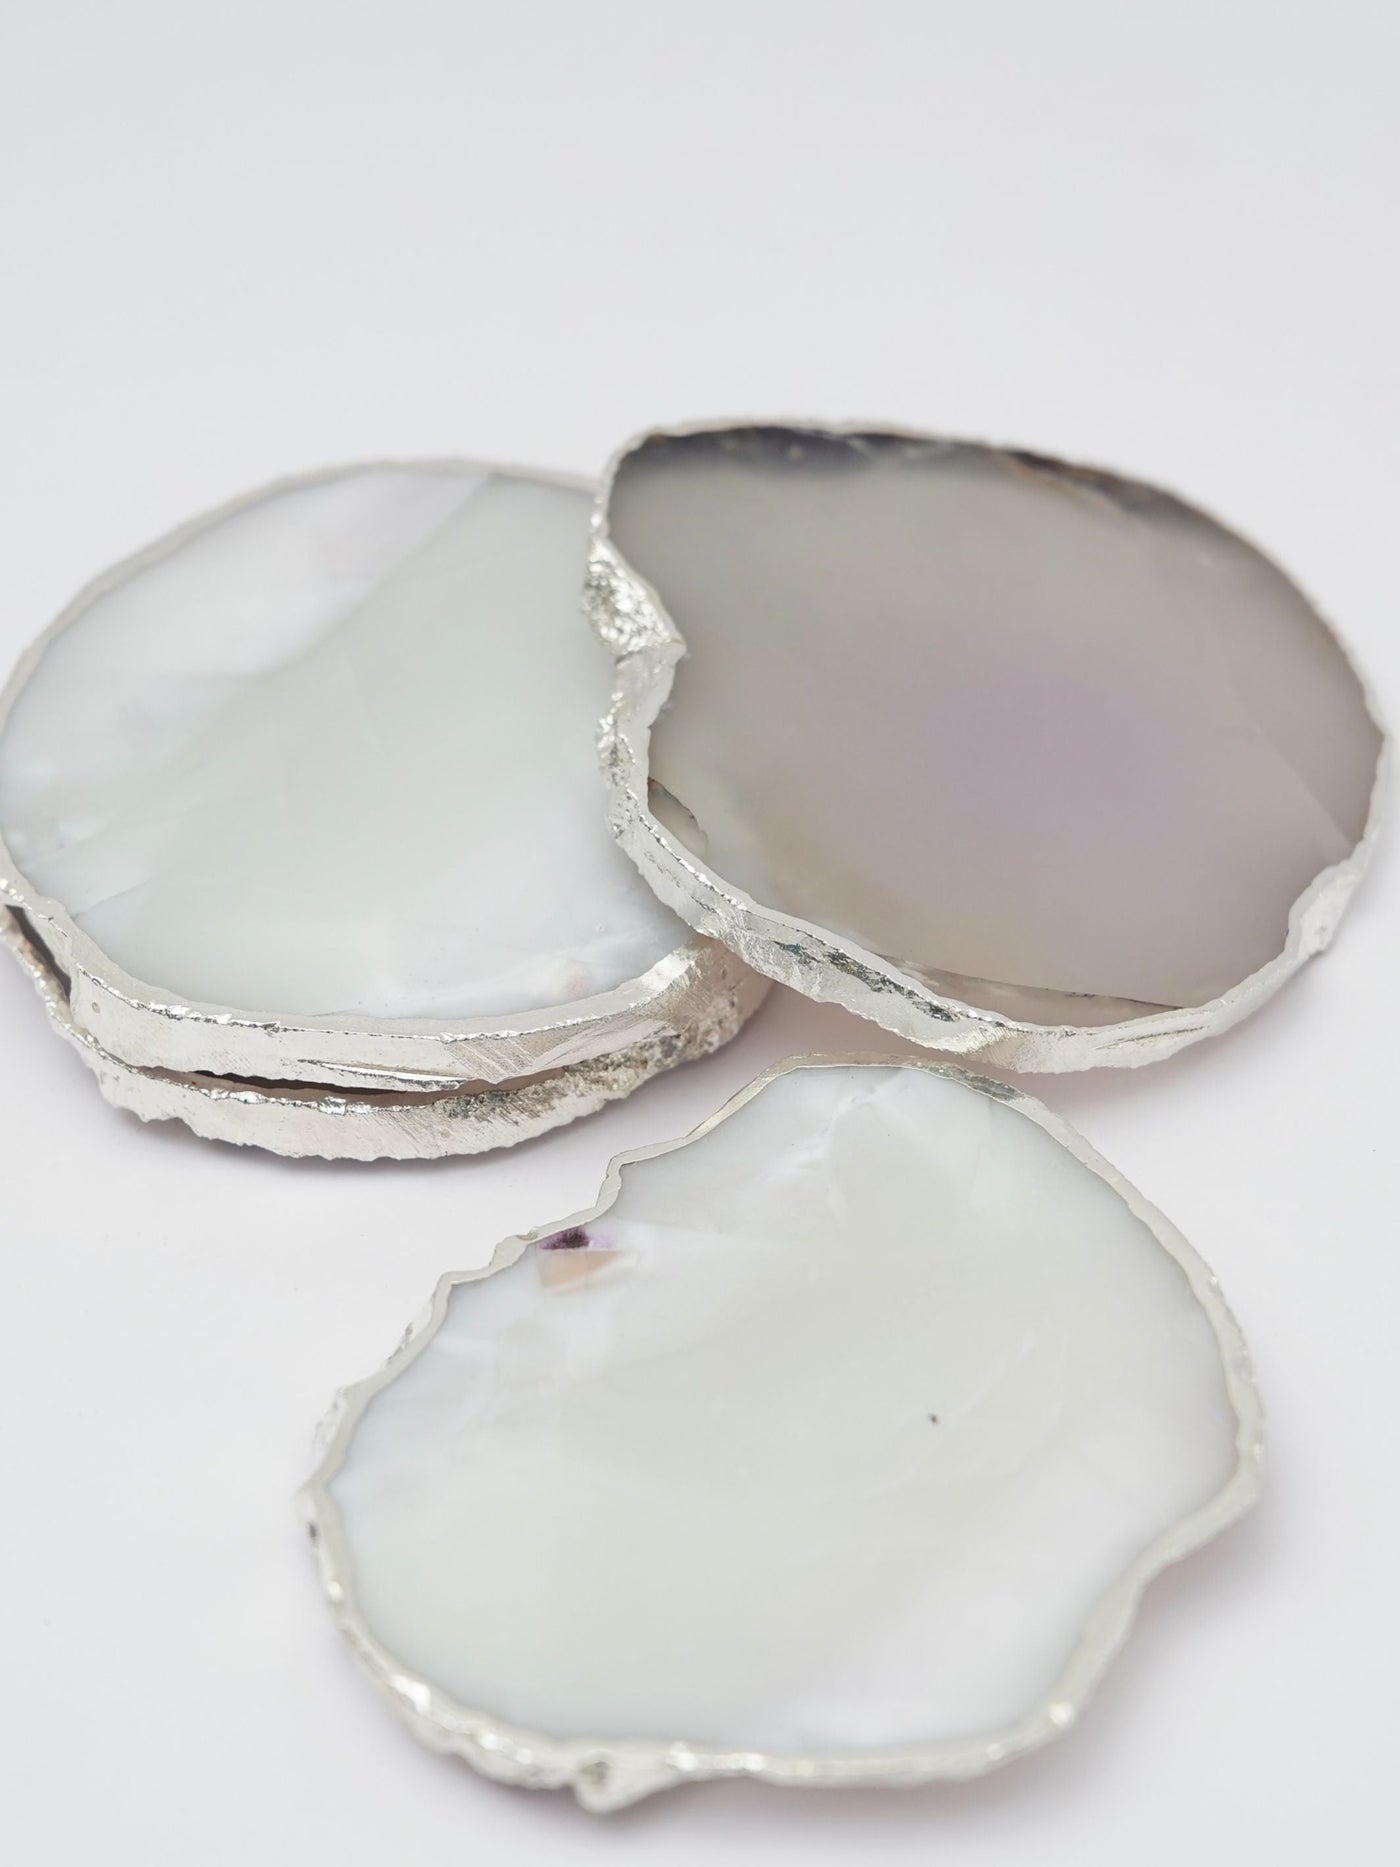 Coaster Set of 4 - Brazilian Agate White with Silver Plated edge